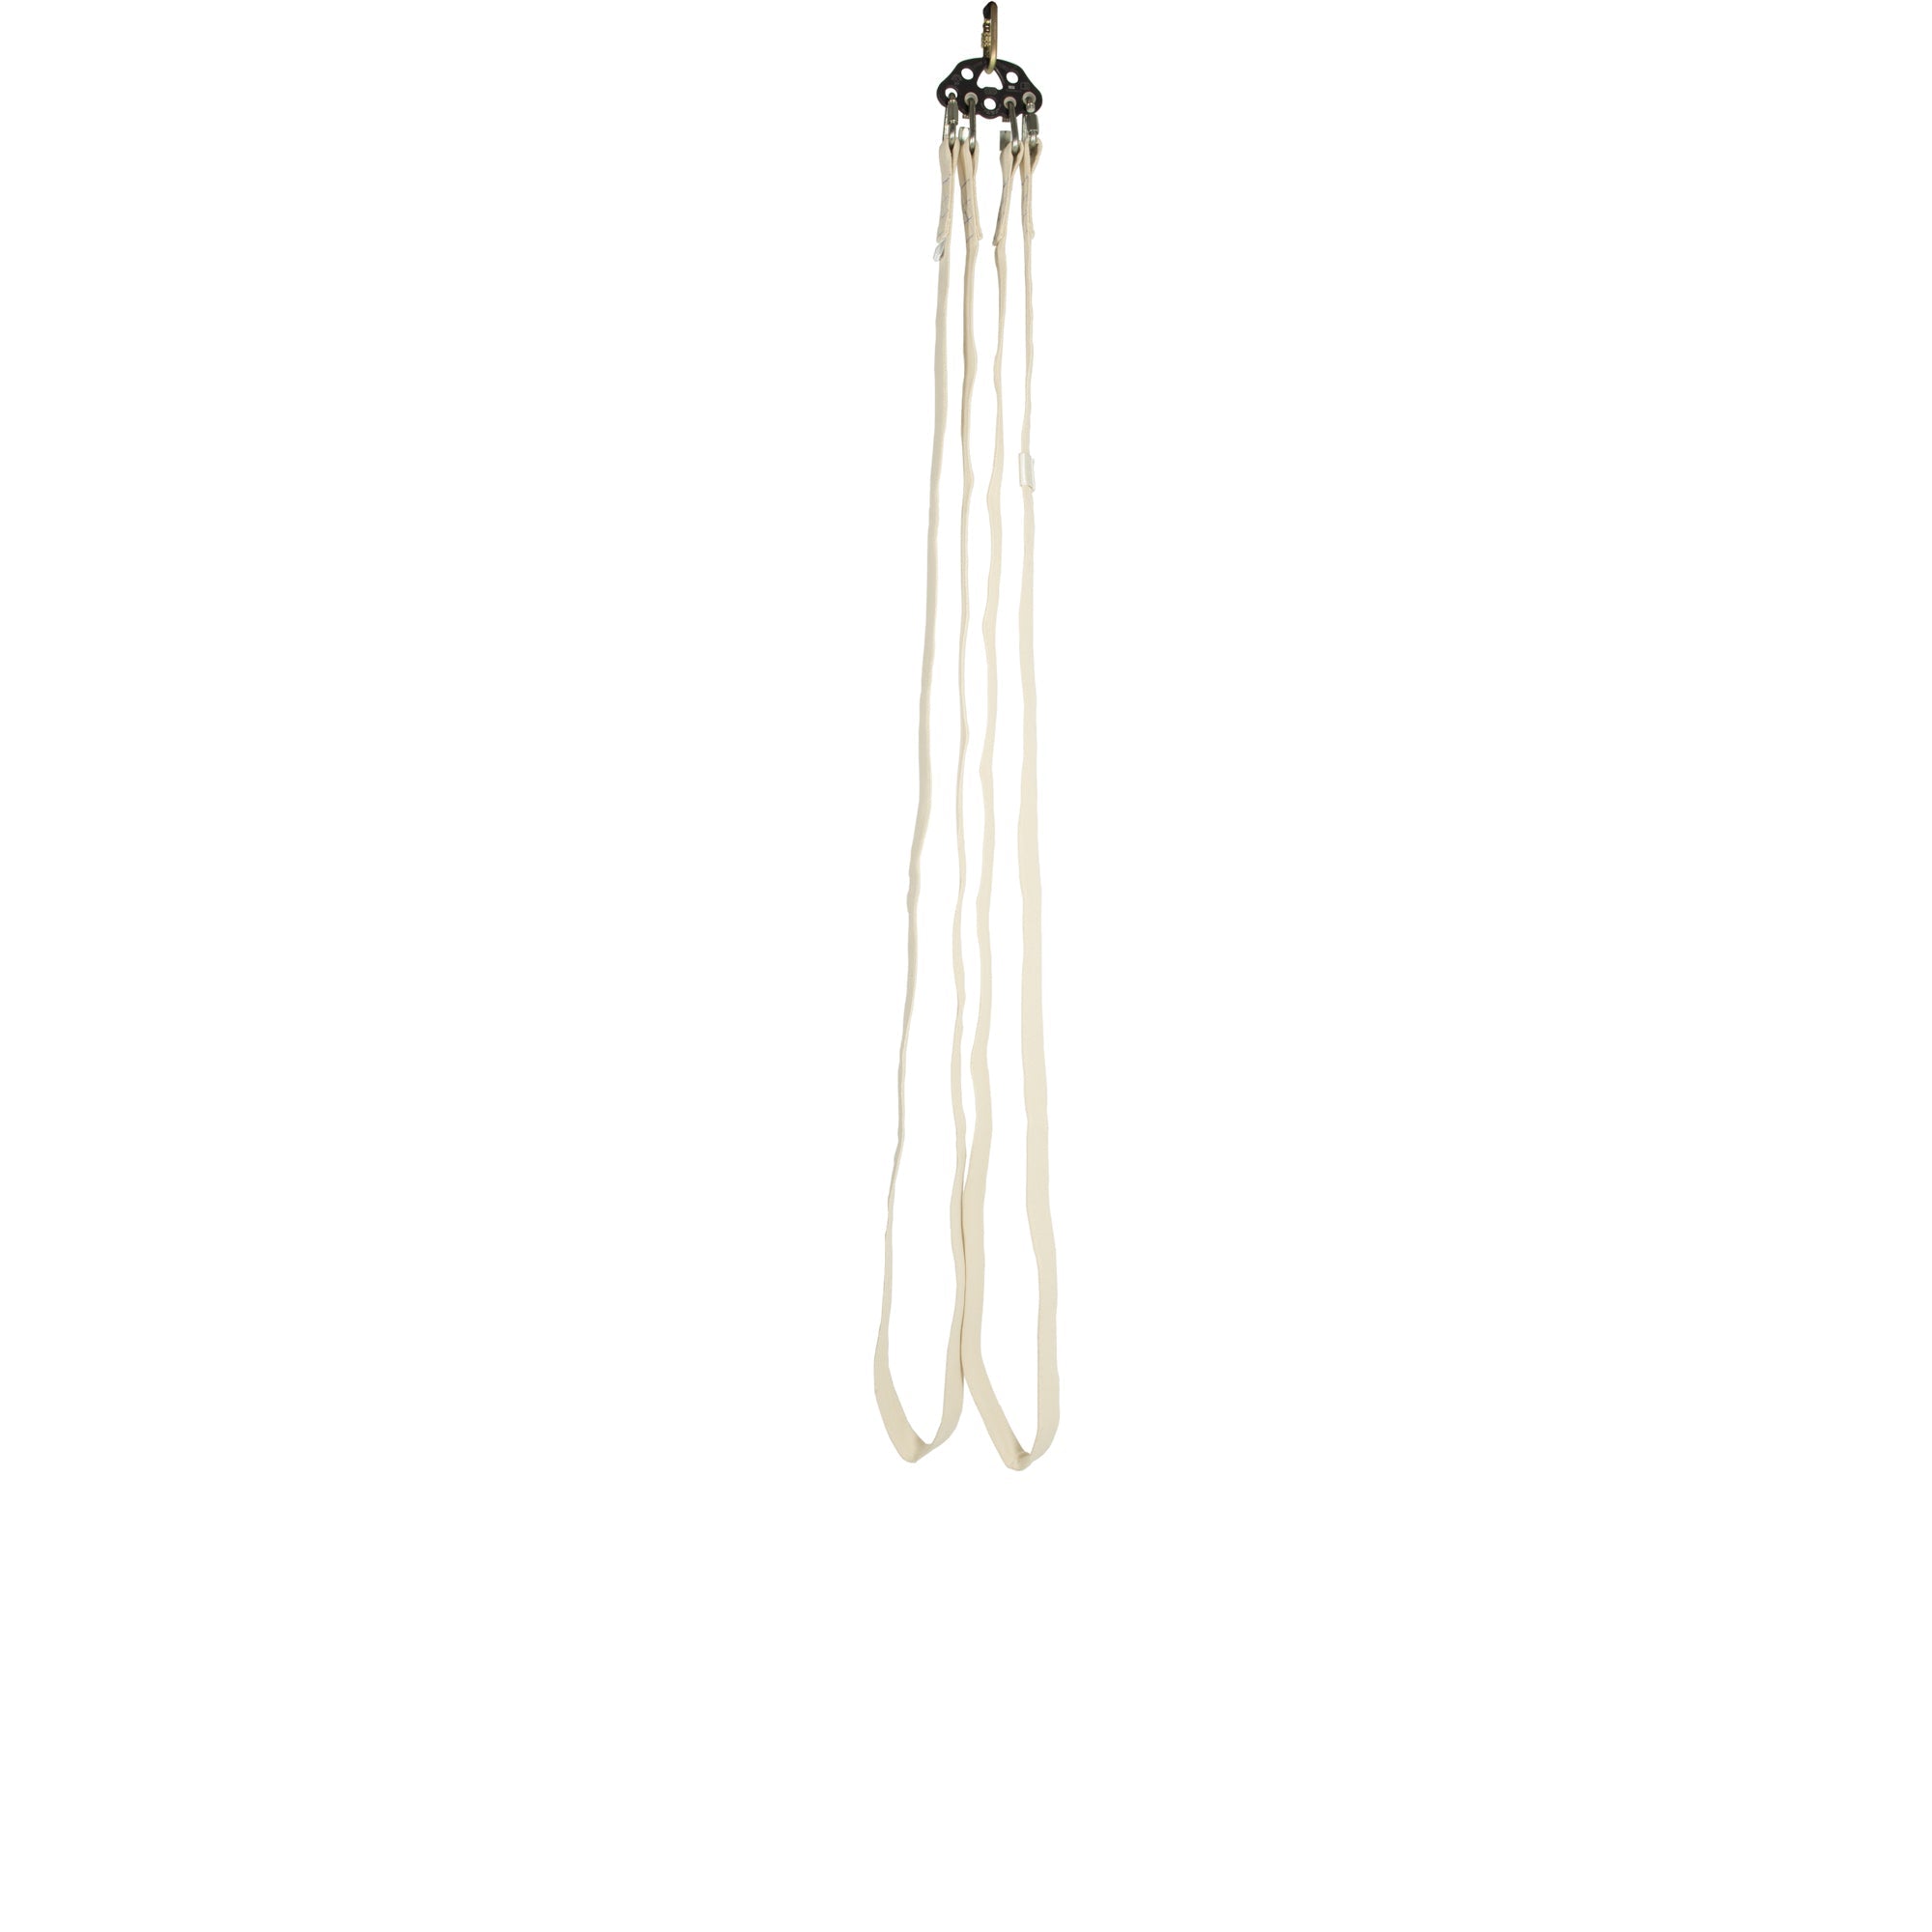 Prodigy cotton covered aerial loops 200cm rigged